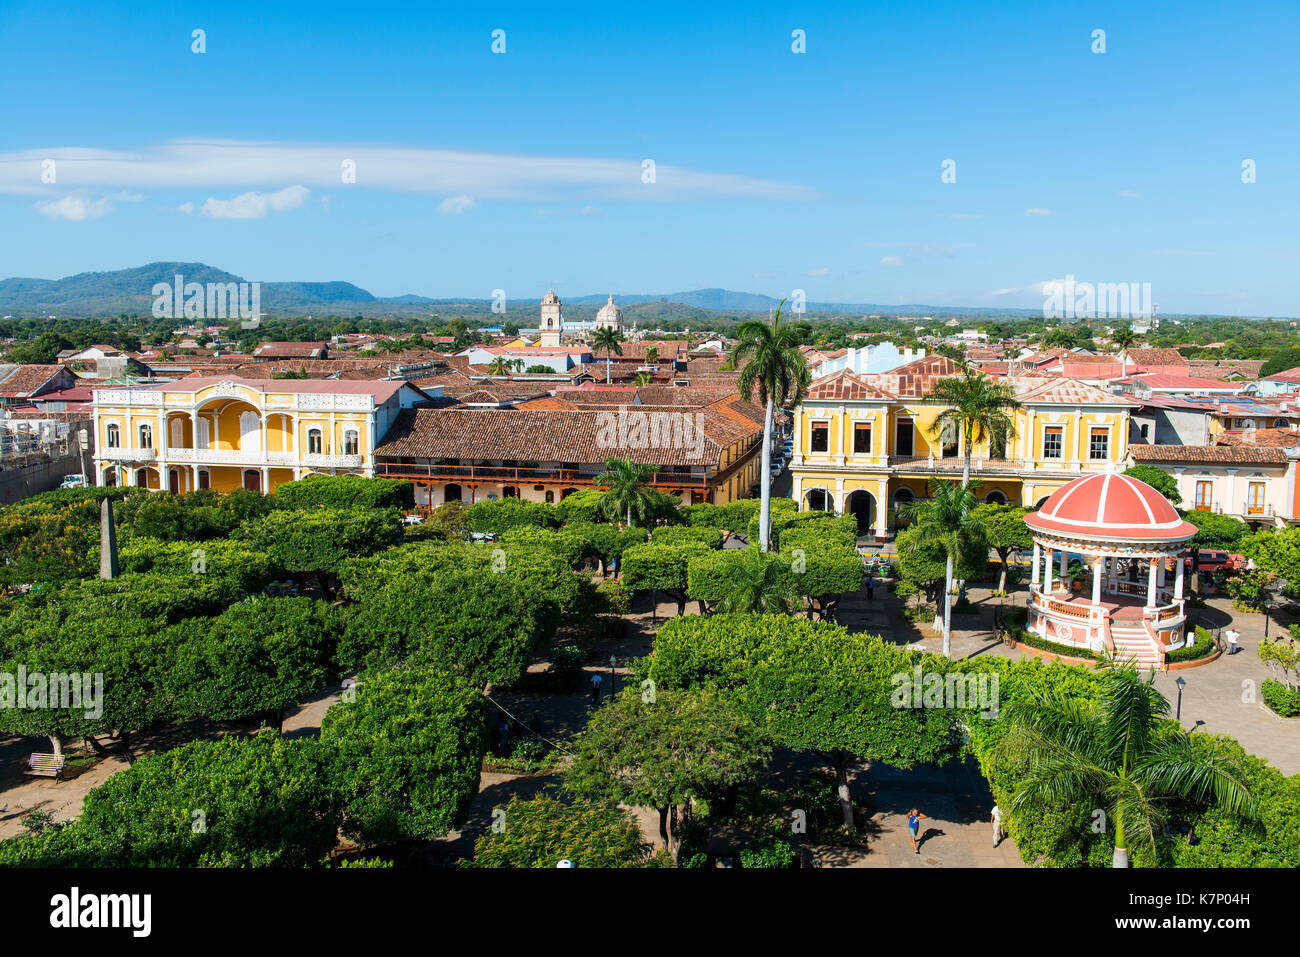 View from the cathedral Nuestra Senora de la Asuncion to the houses at the Parque Central, Old Town, Granada, Nicaragua Stock Photo